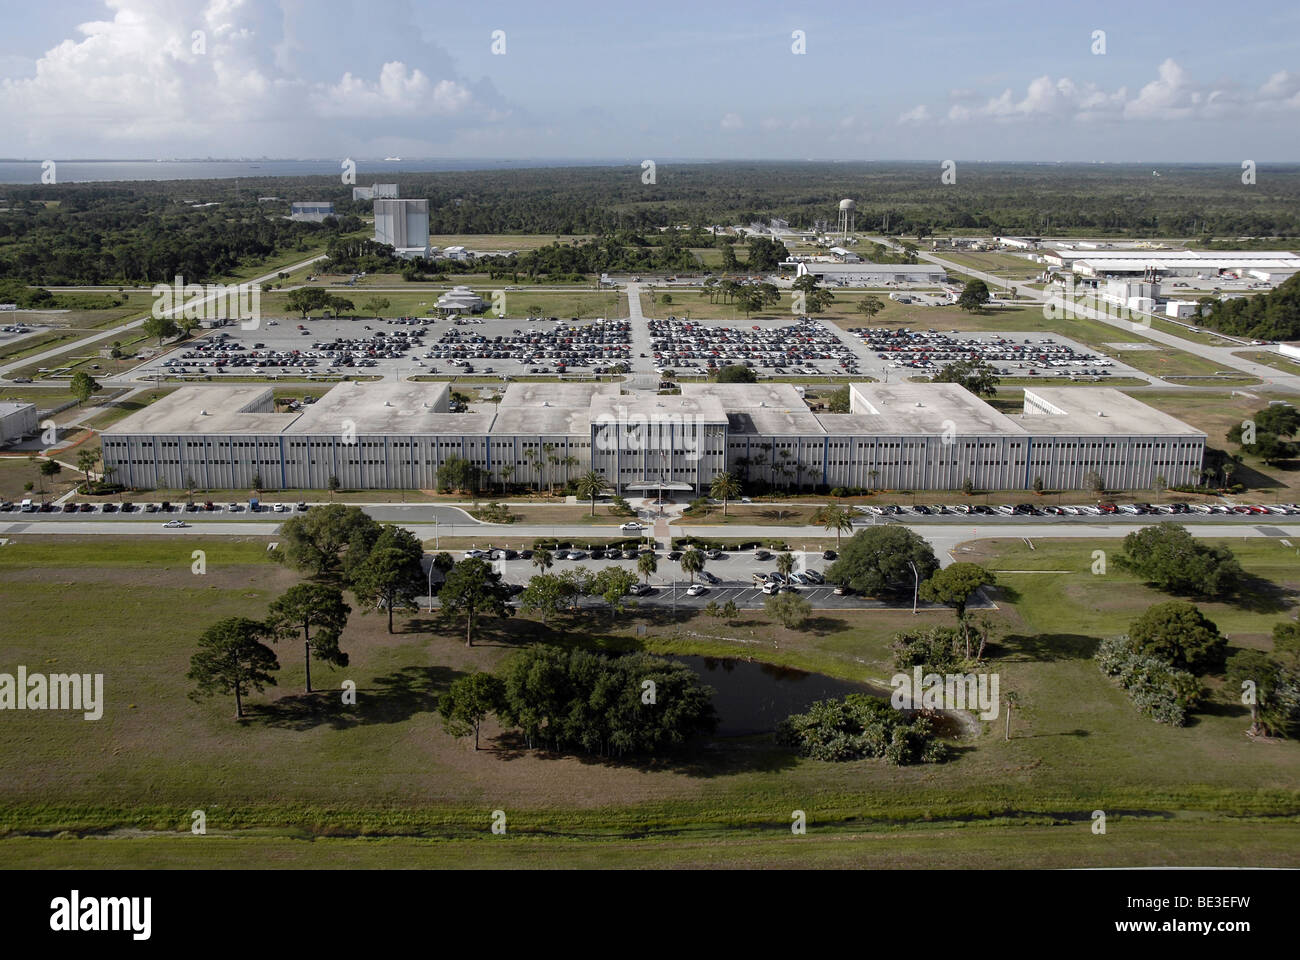 Cape Canaveral, Florida, May 15, 2009 - This aerial view of NASA's Kennedy Space Center shows the Headquarters Building. Stock Photo